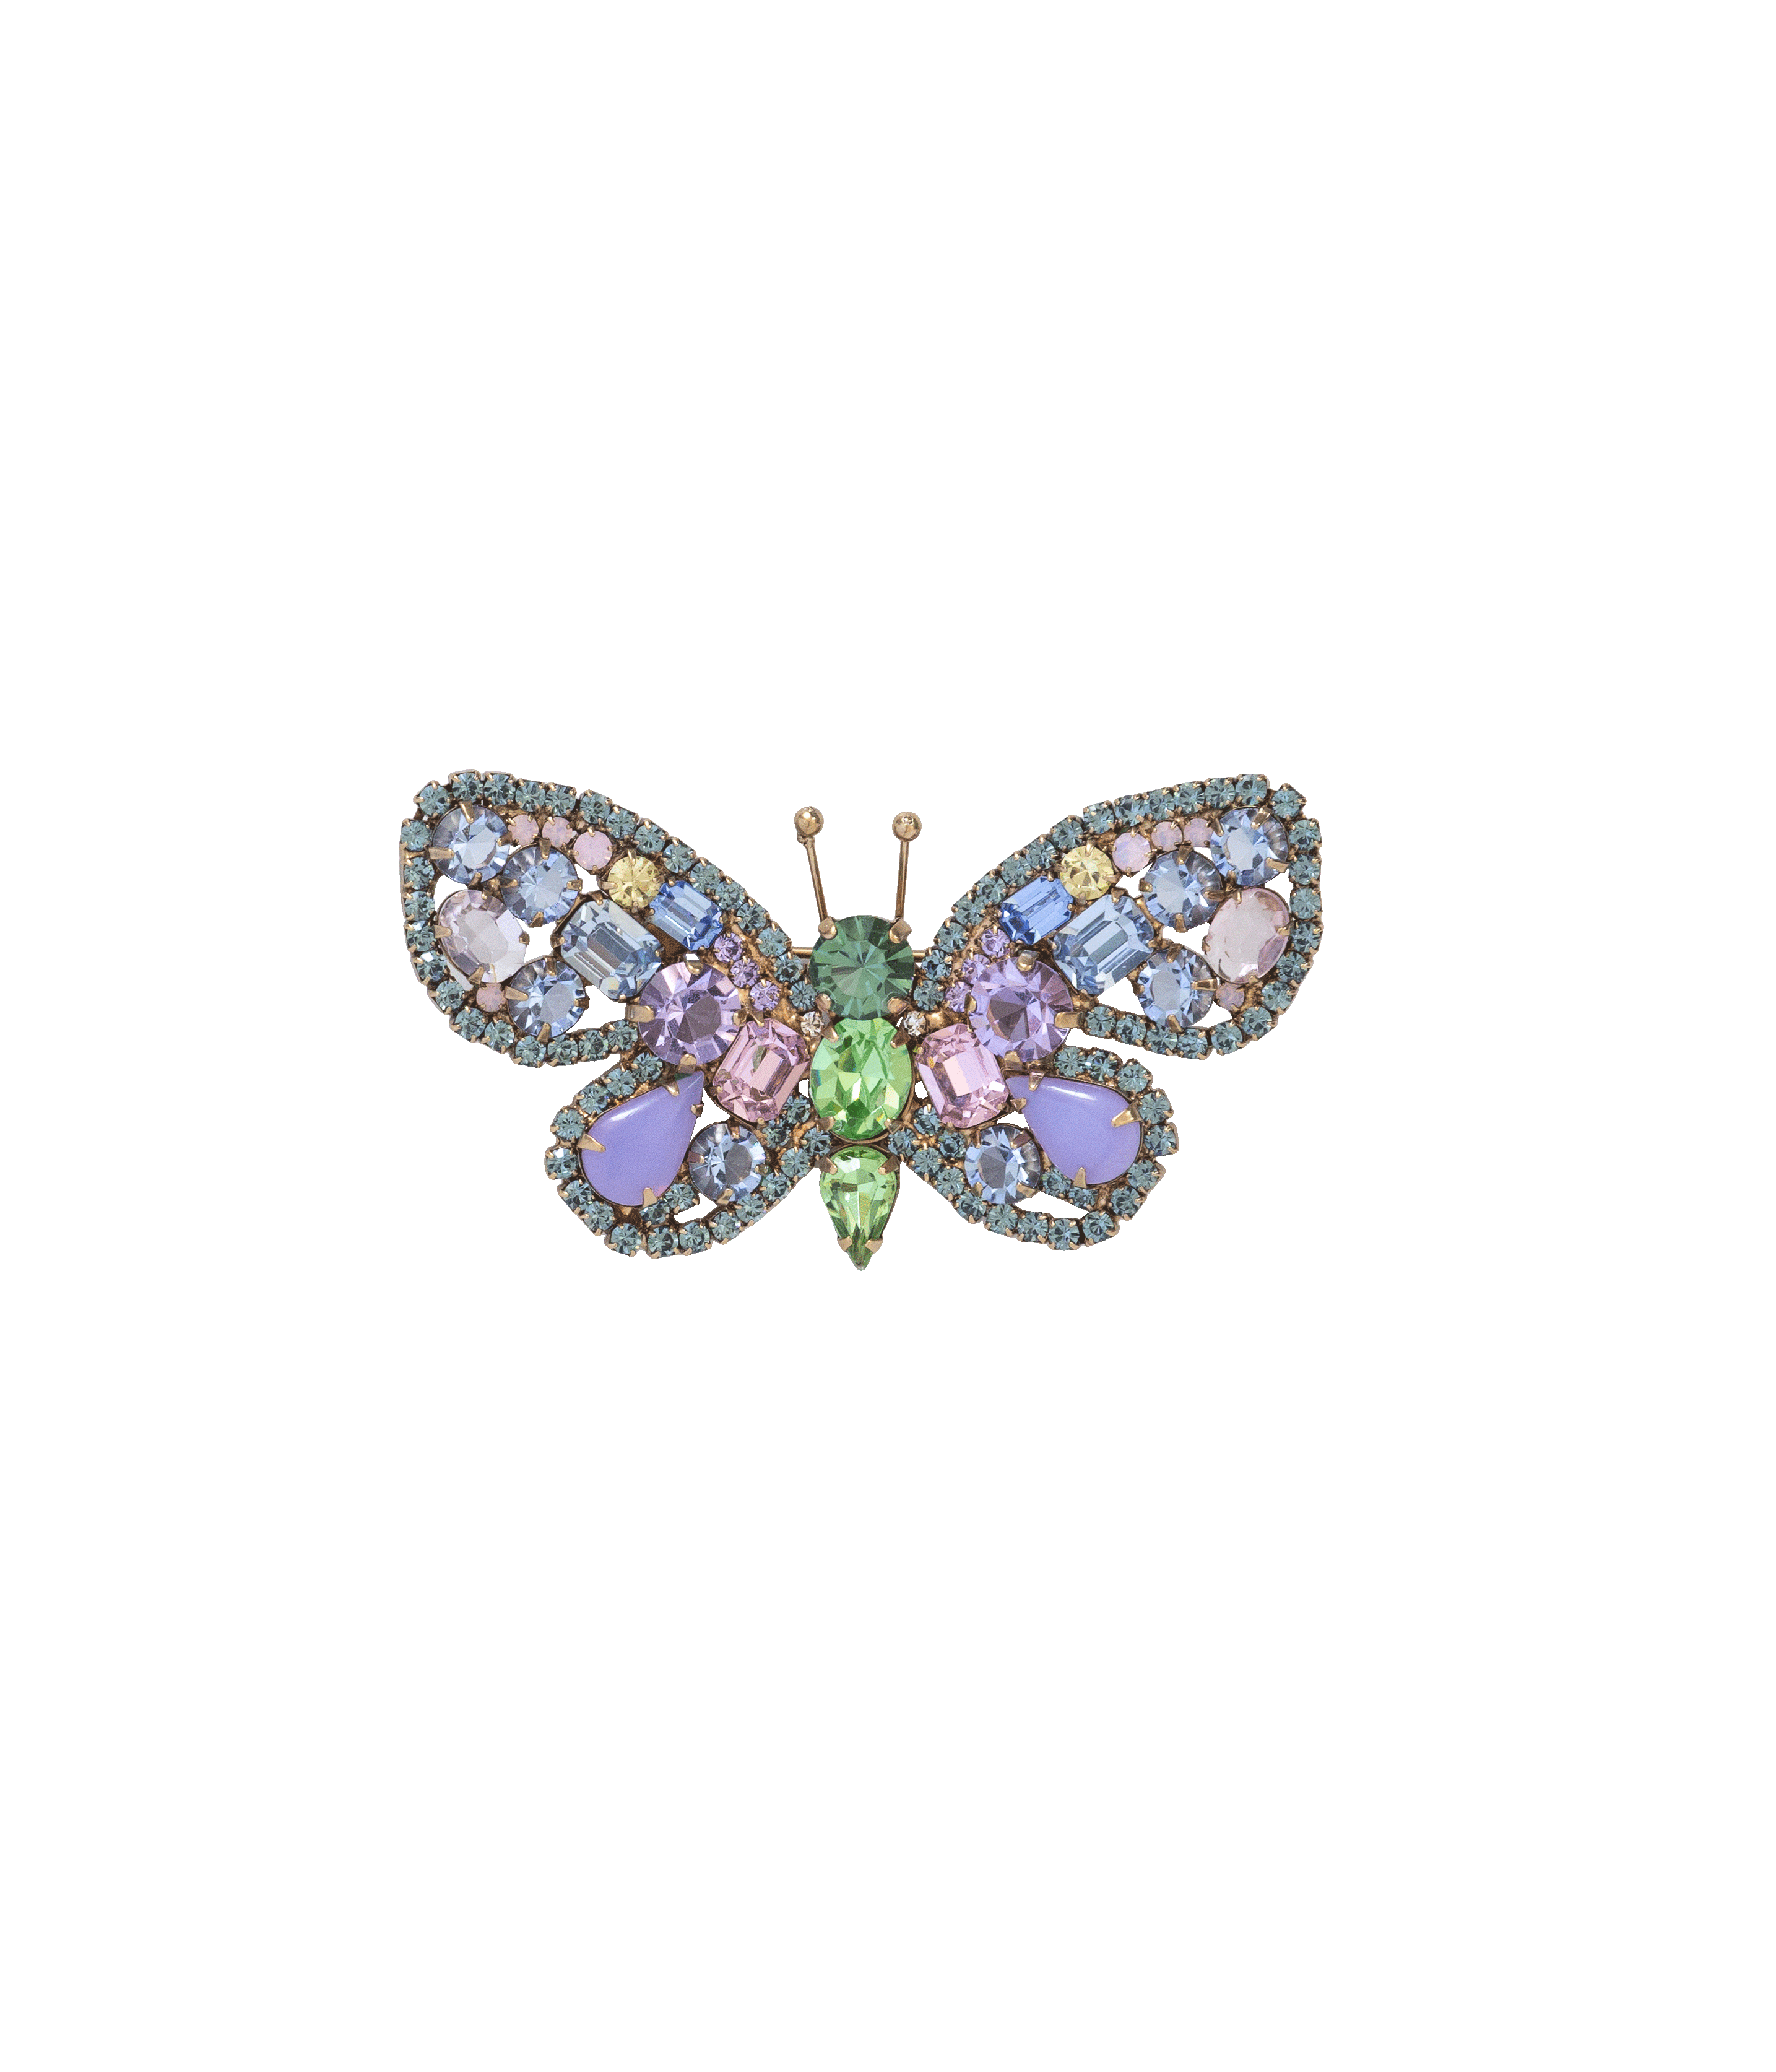 Small Butterfly in Peridot / Amethyst / Smoked Sapphire